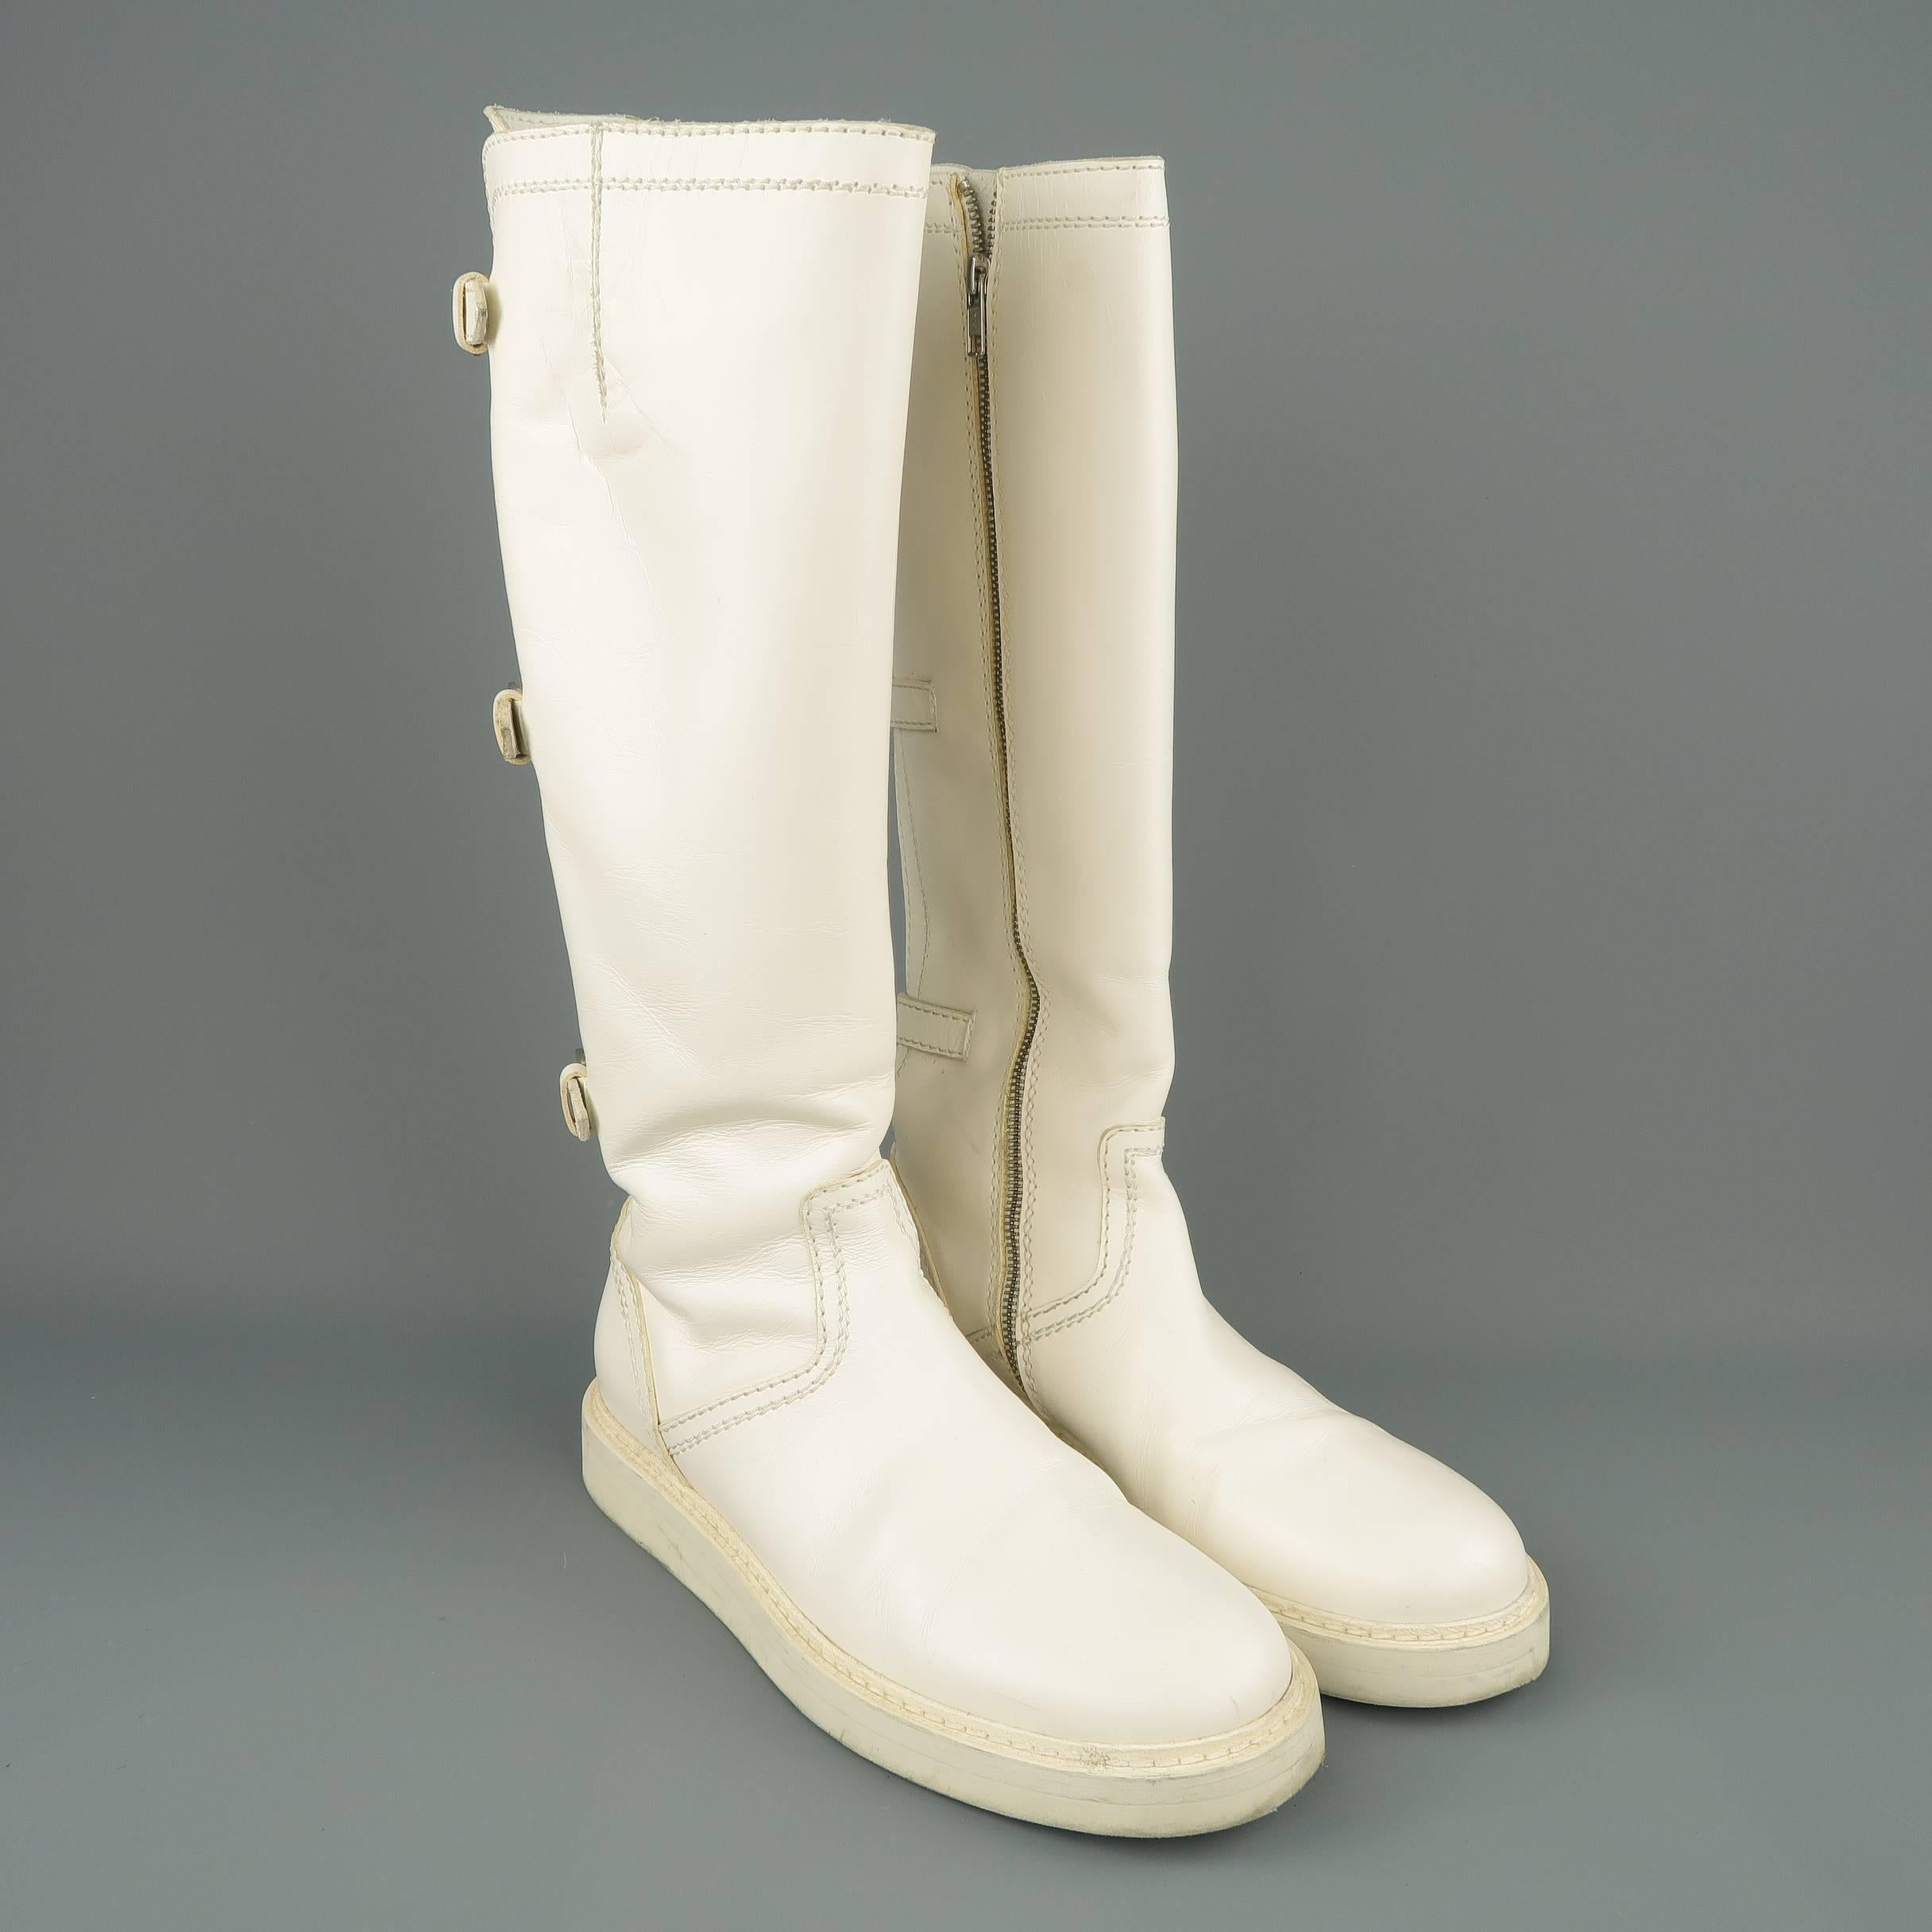 ANN DEMEULEMEESTER knee high boots come in off white leather with a round toe, thick rubber sole, buckle strapped back, and internal zip closure. Made in Italy.
 
Good Pre-Owned Condition.
Marked: IT 41
 
Measurements:
 
Outsole: 12 x 4.5